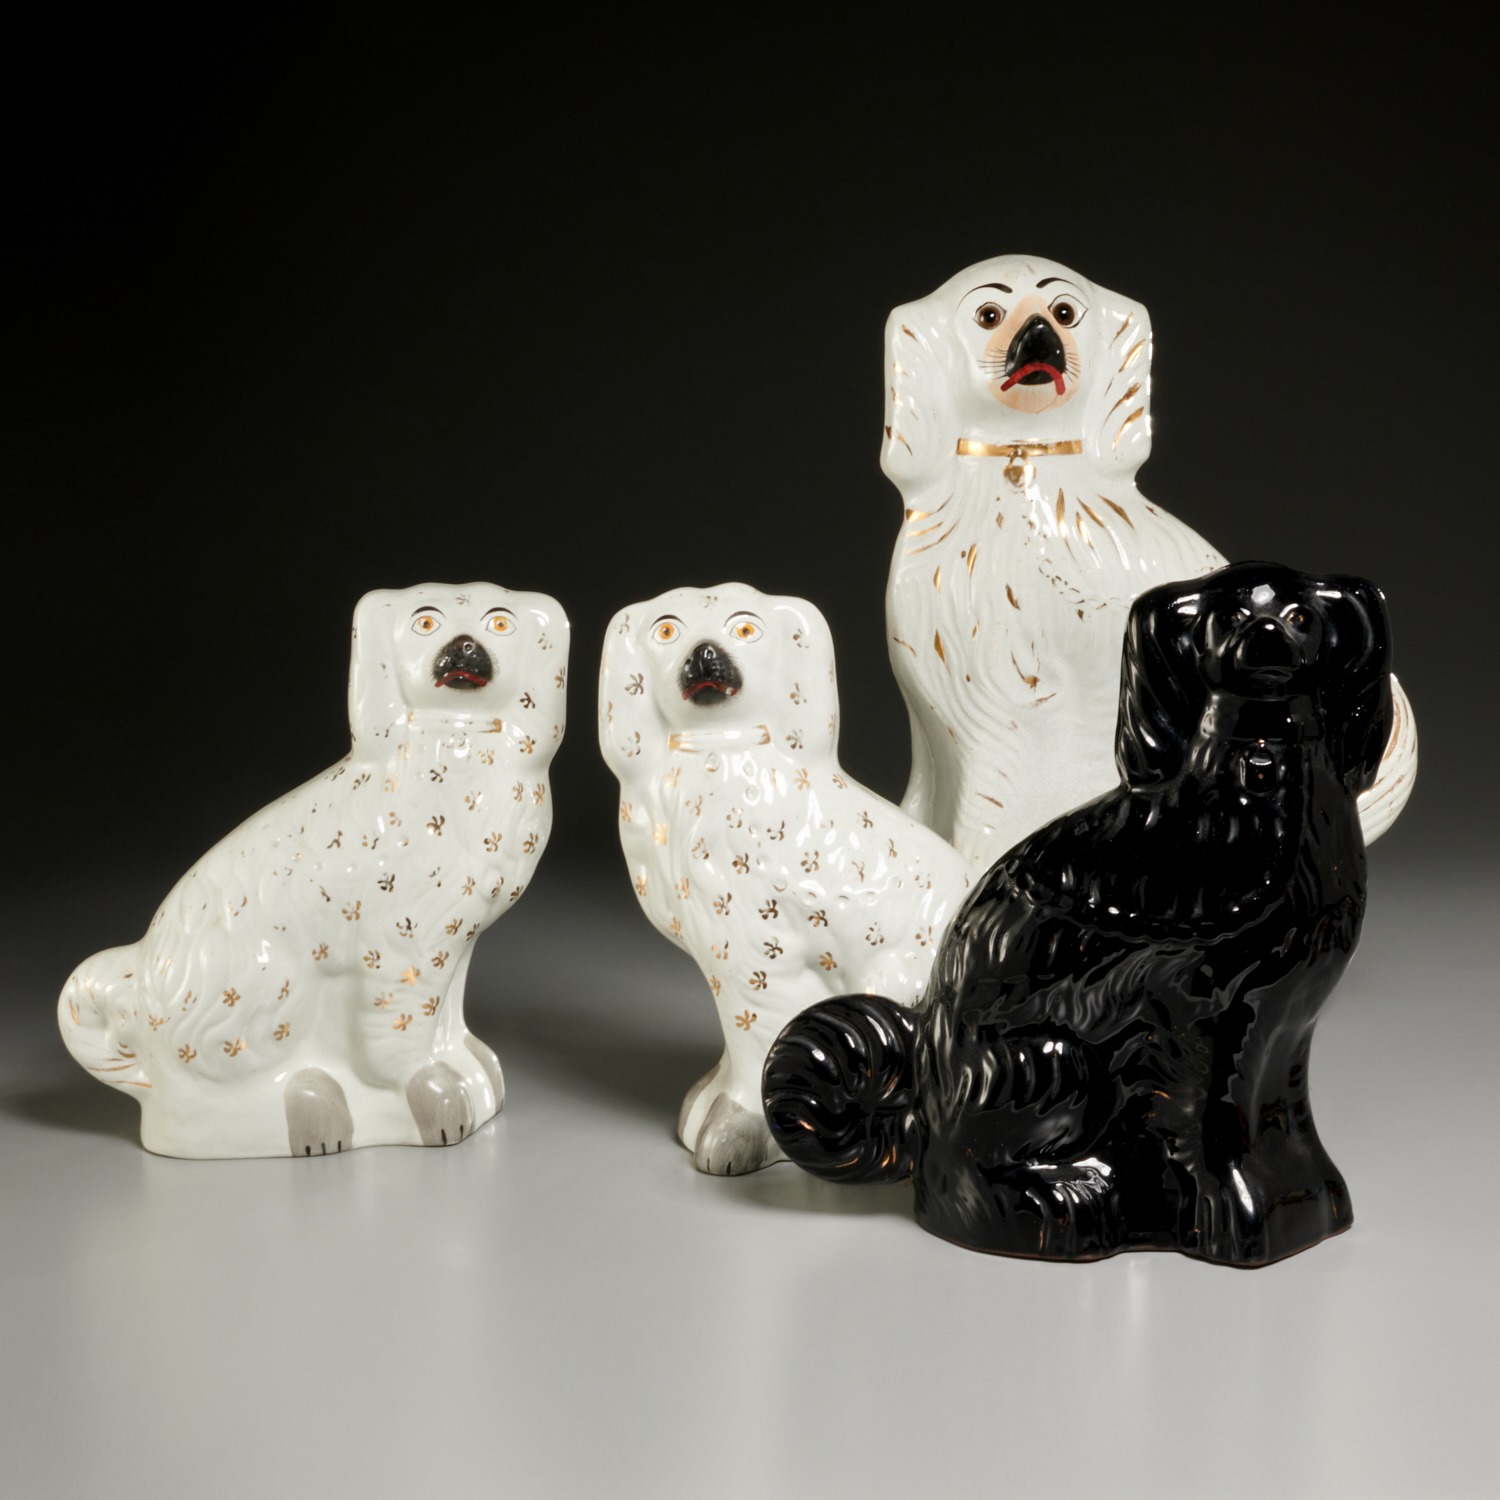 (4) LARGE STAFFORDSHIRE DOGS 19th c.,